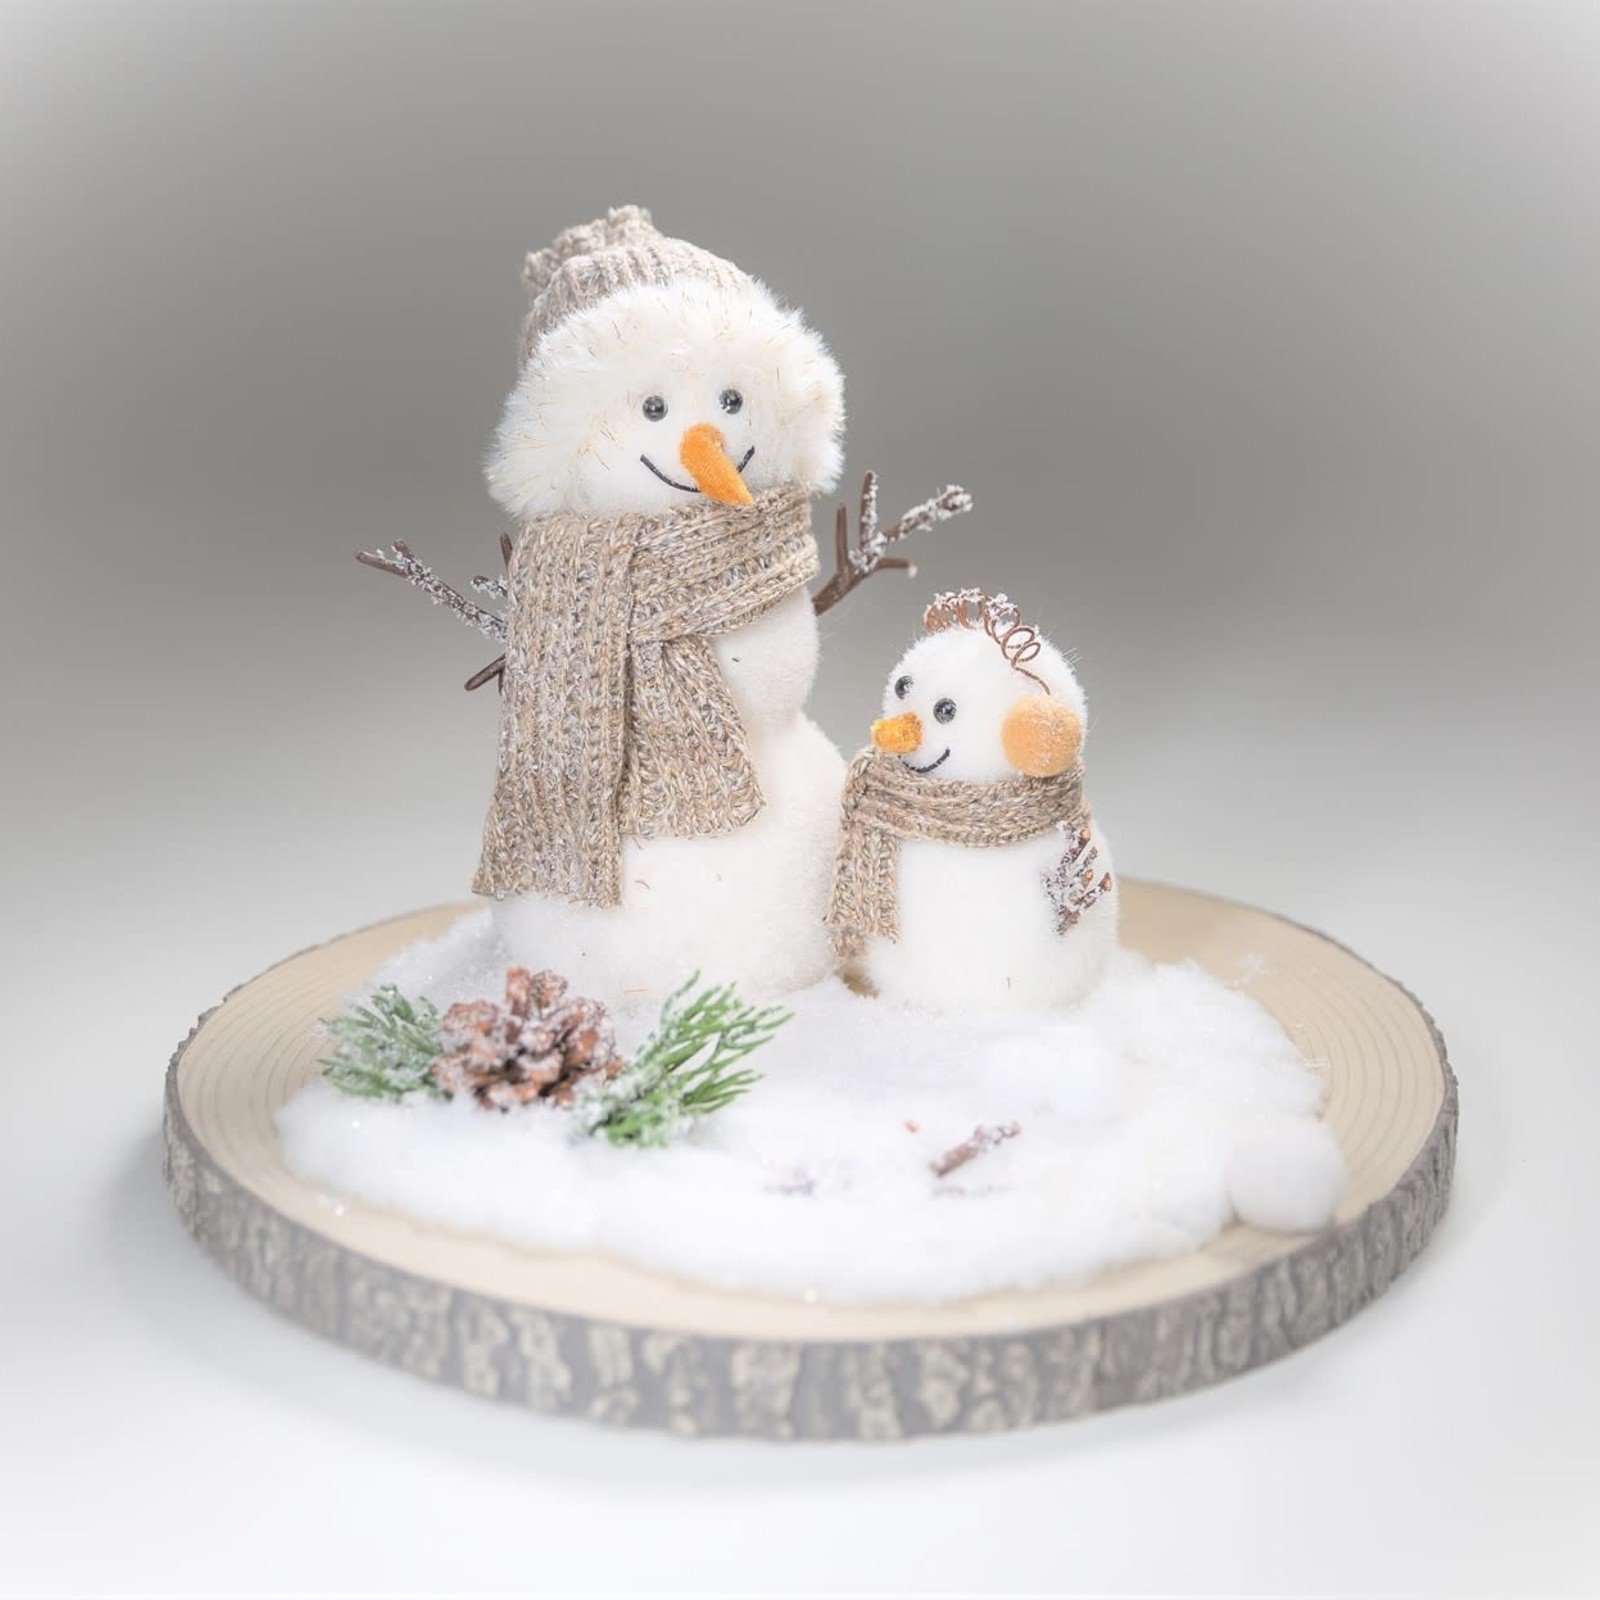 Trade Cie Snowman Scene on Wood Chip, 11" Wide   CM4568 loading=